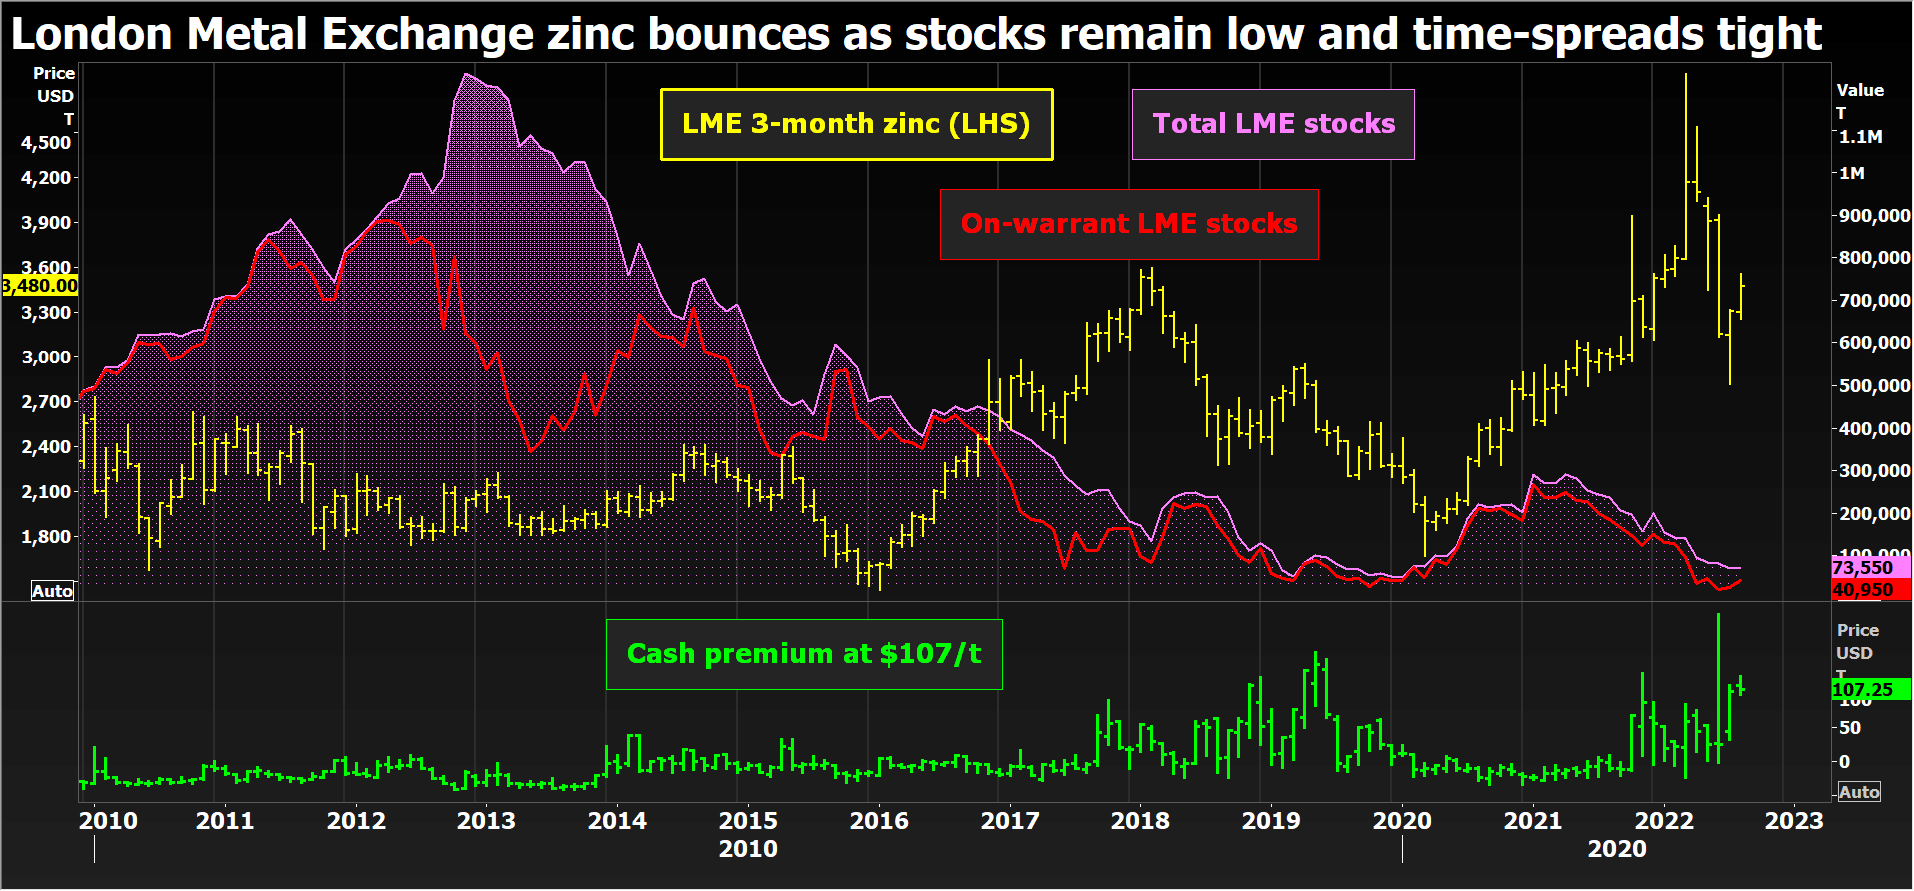 LME zinc price bounced as stocks remain low and time-spreads tight